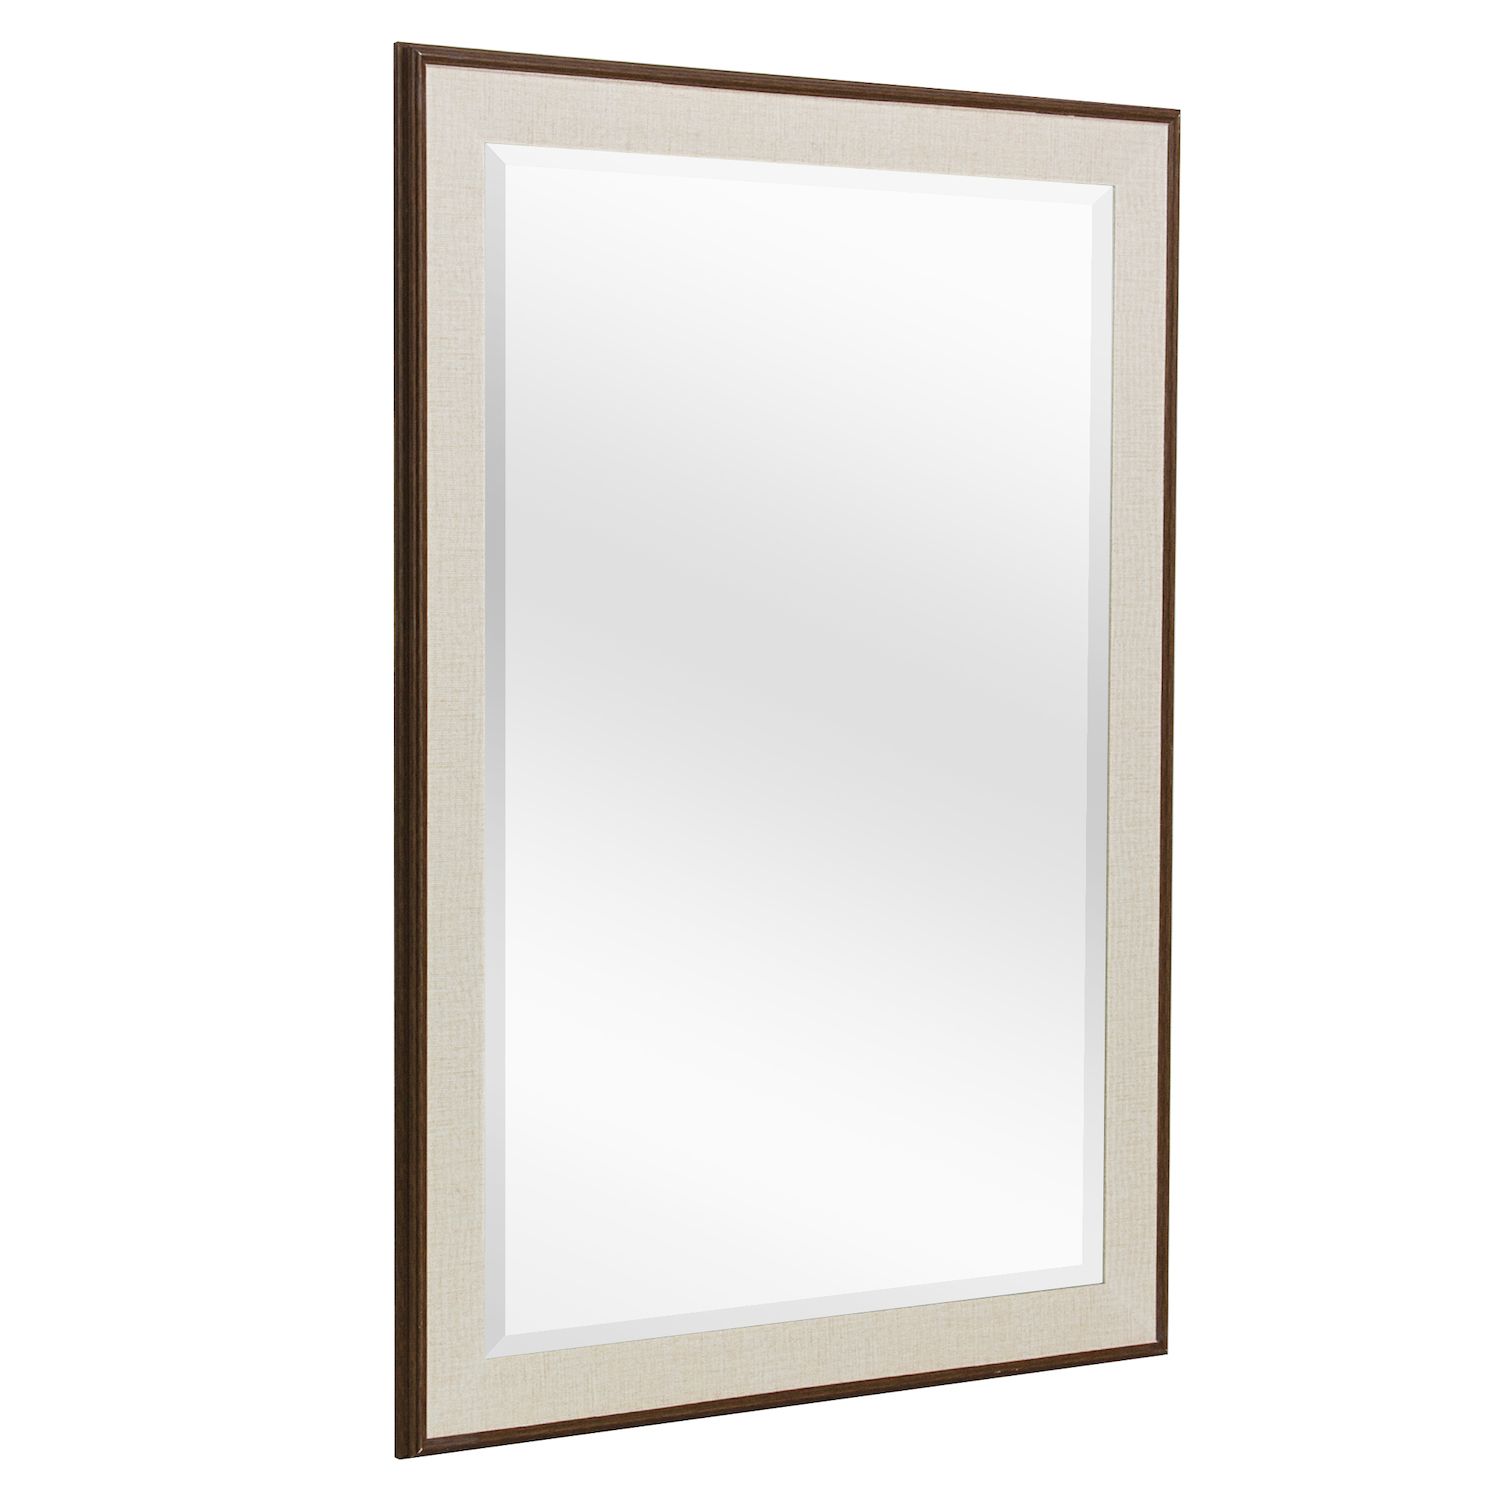 Image for Head West Two-Tone Framed Wall Mirror 27" x 33" at Kohl's.